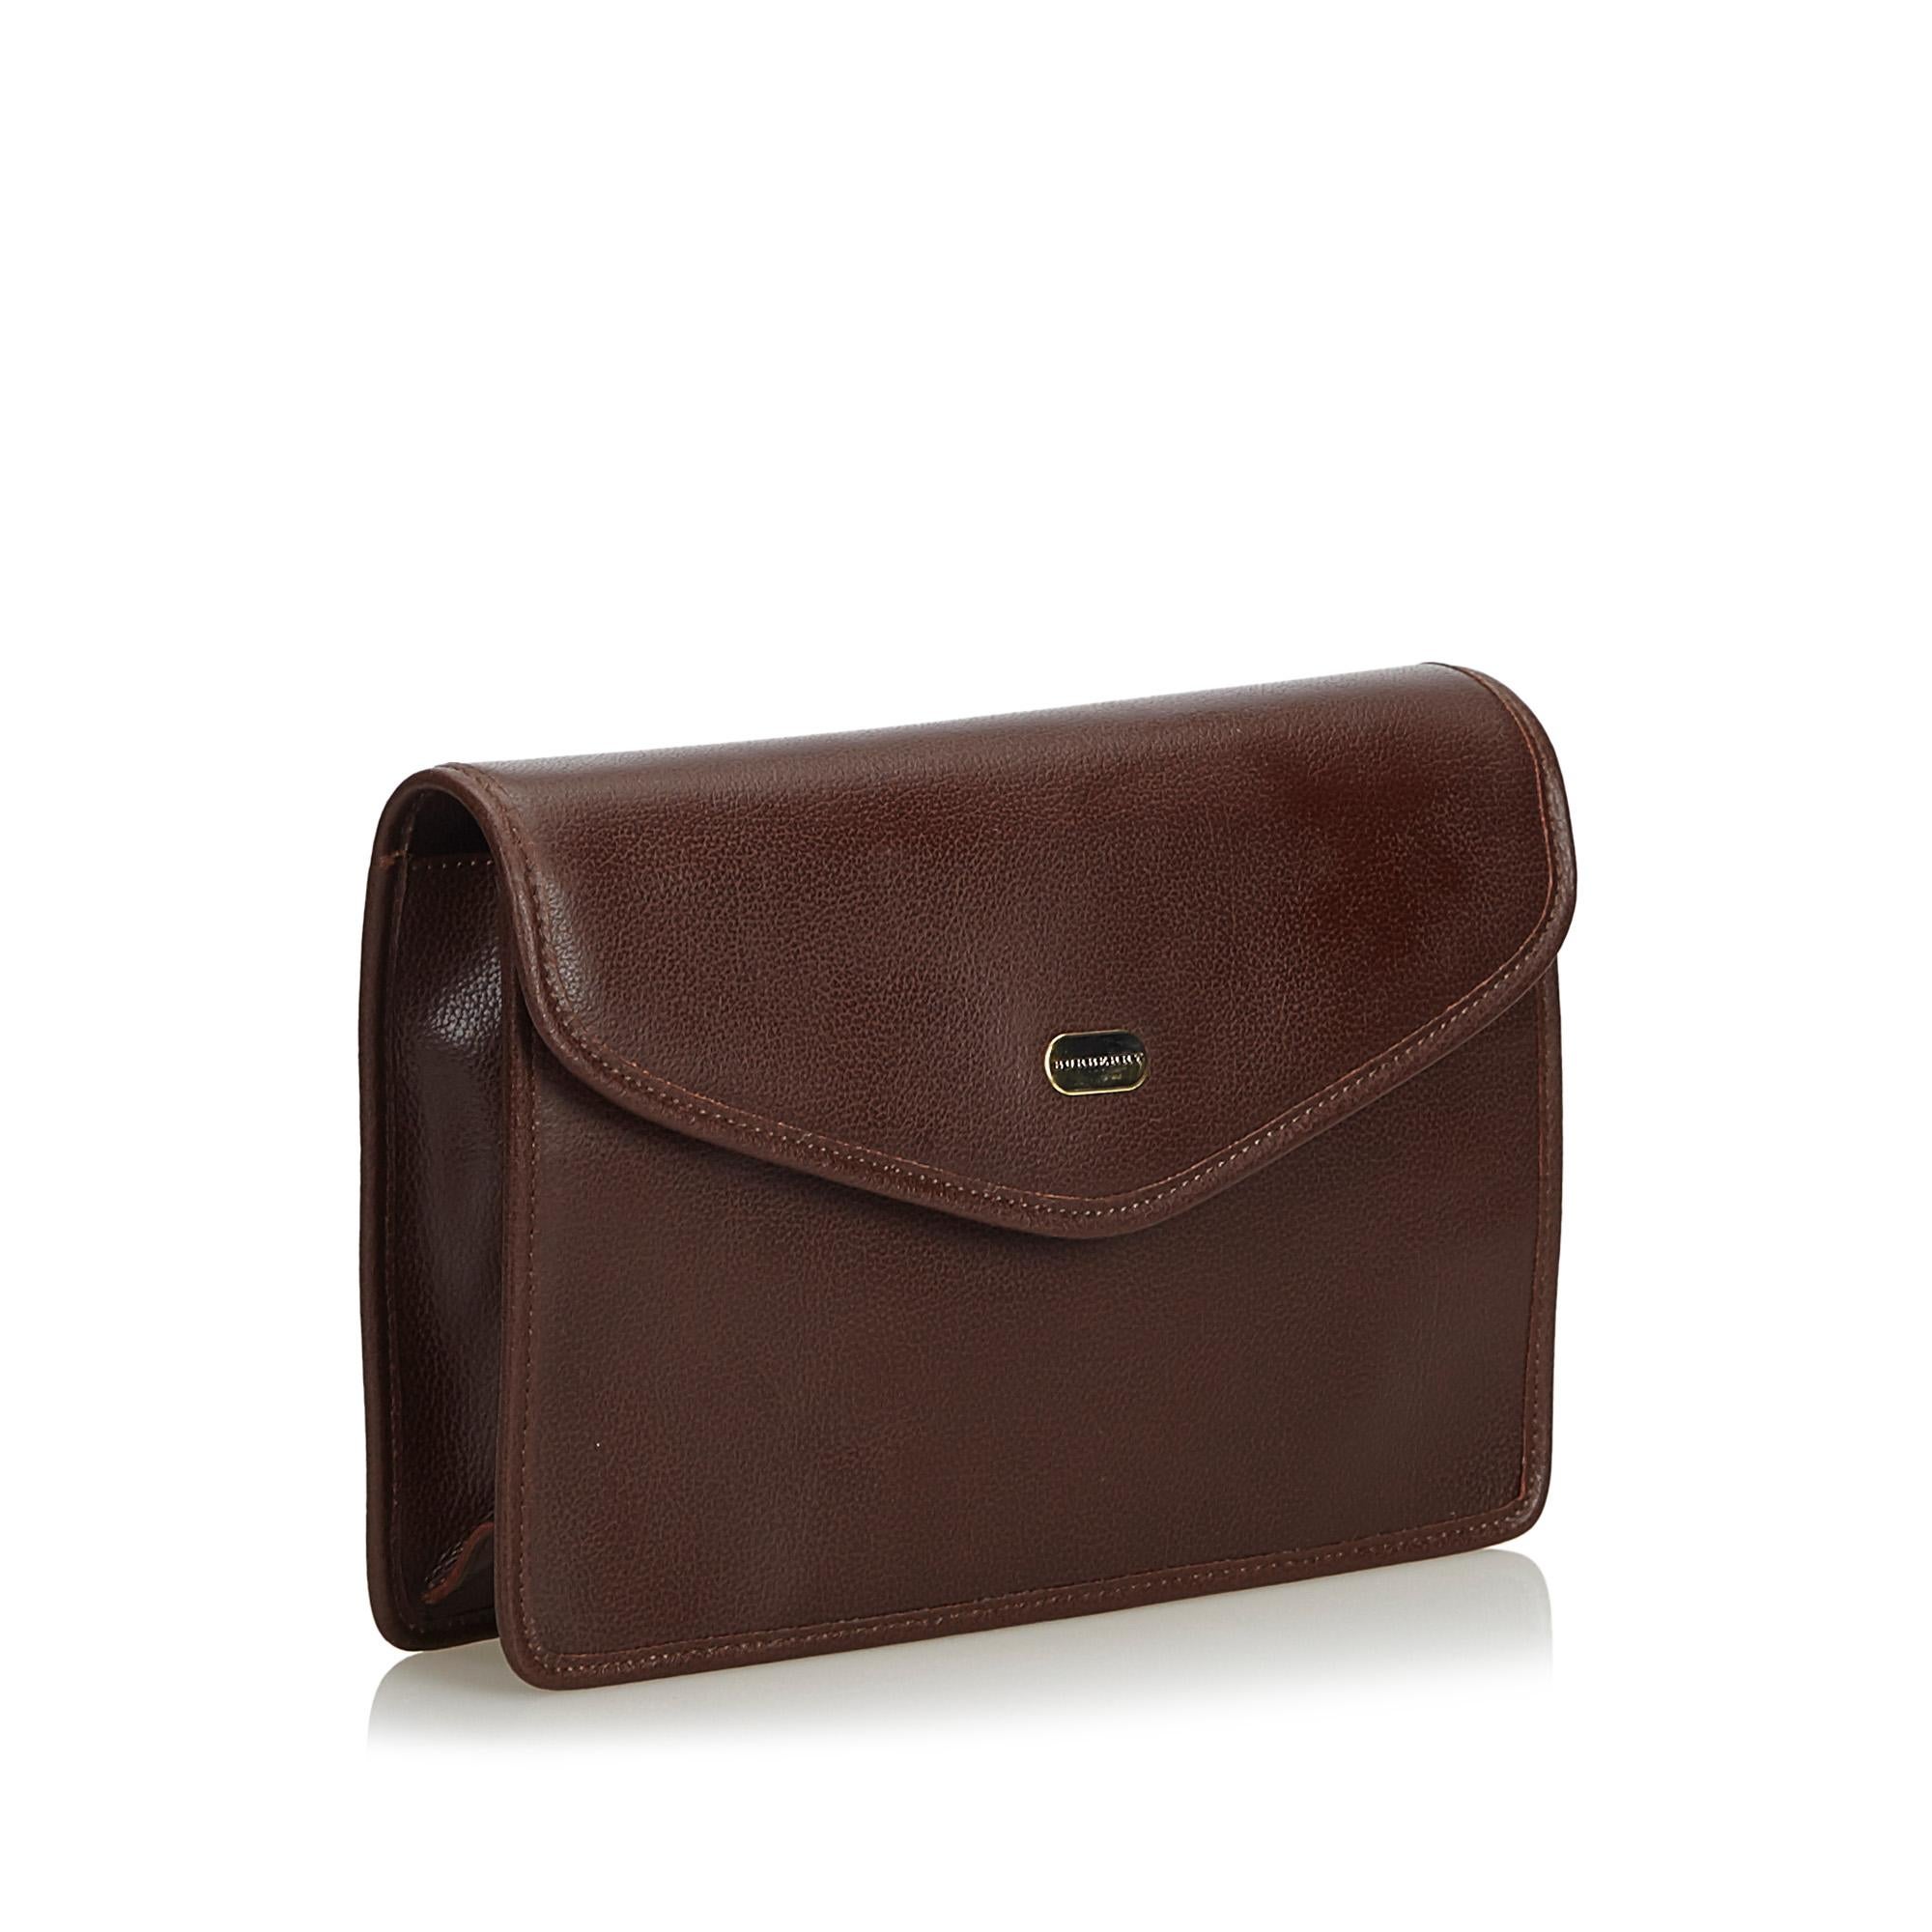 This clutch bag features a leather body, a flat leather hand strap, a front flap with magnetic closure, and an interior zip pocket. It carries as B+ condition rating.

Inclusions: 
This item does not come with inclusions.

Dimensions:
Length: 18.00